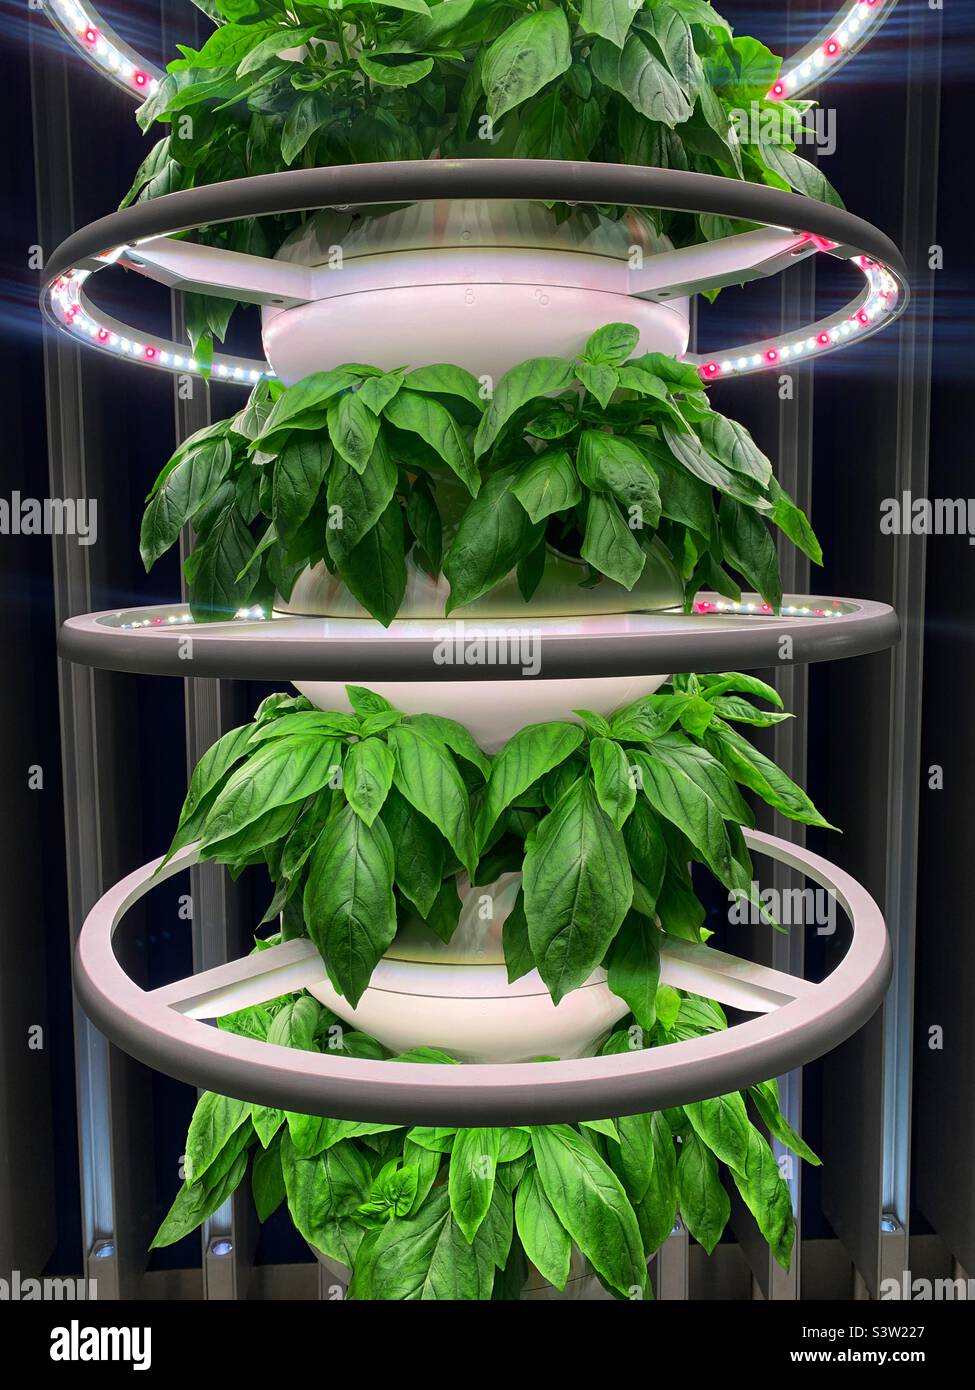 Thai basil growing in a hydroponic vertical garden Stock Photo